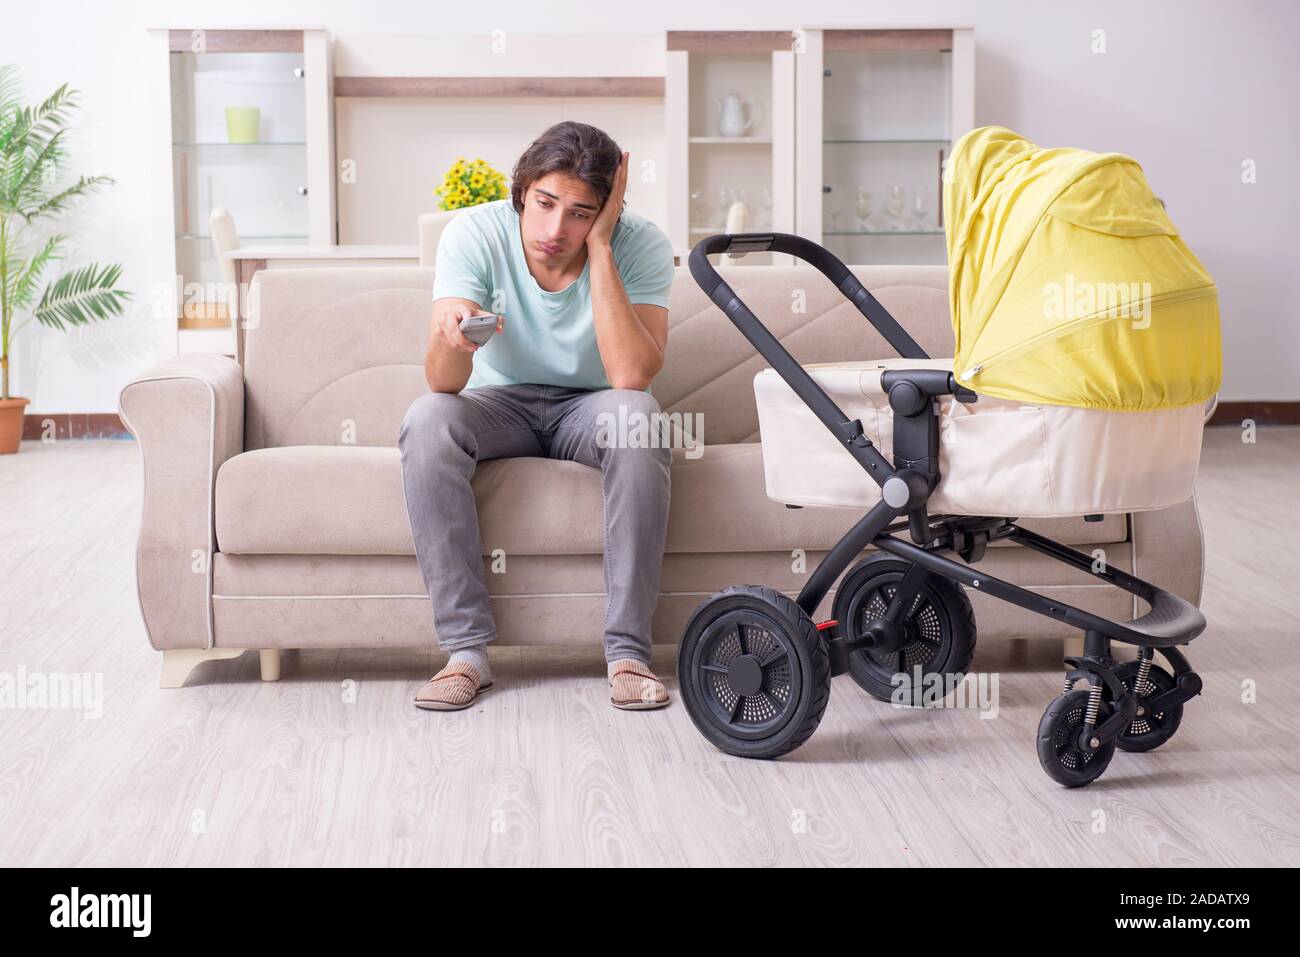 Young man looking after baby in pram Stock Photo